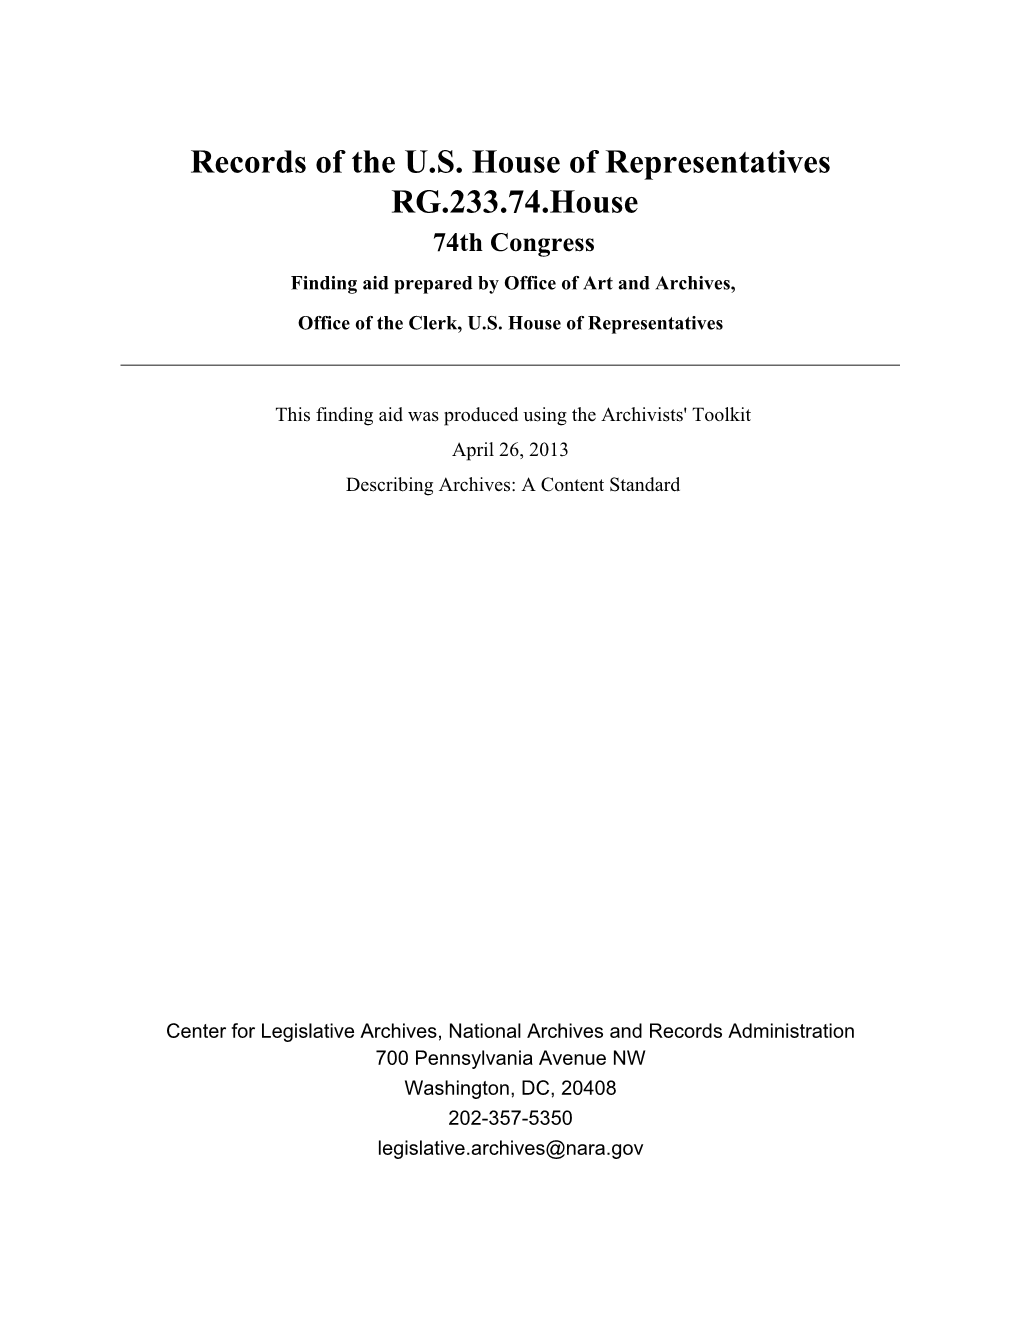 Records of the US House of Representatives RG.233.74.House 74Th Congress